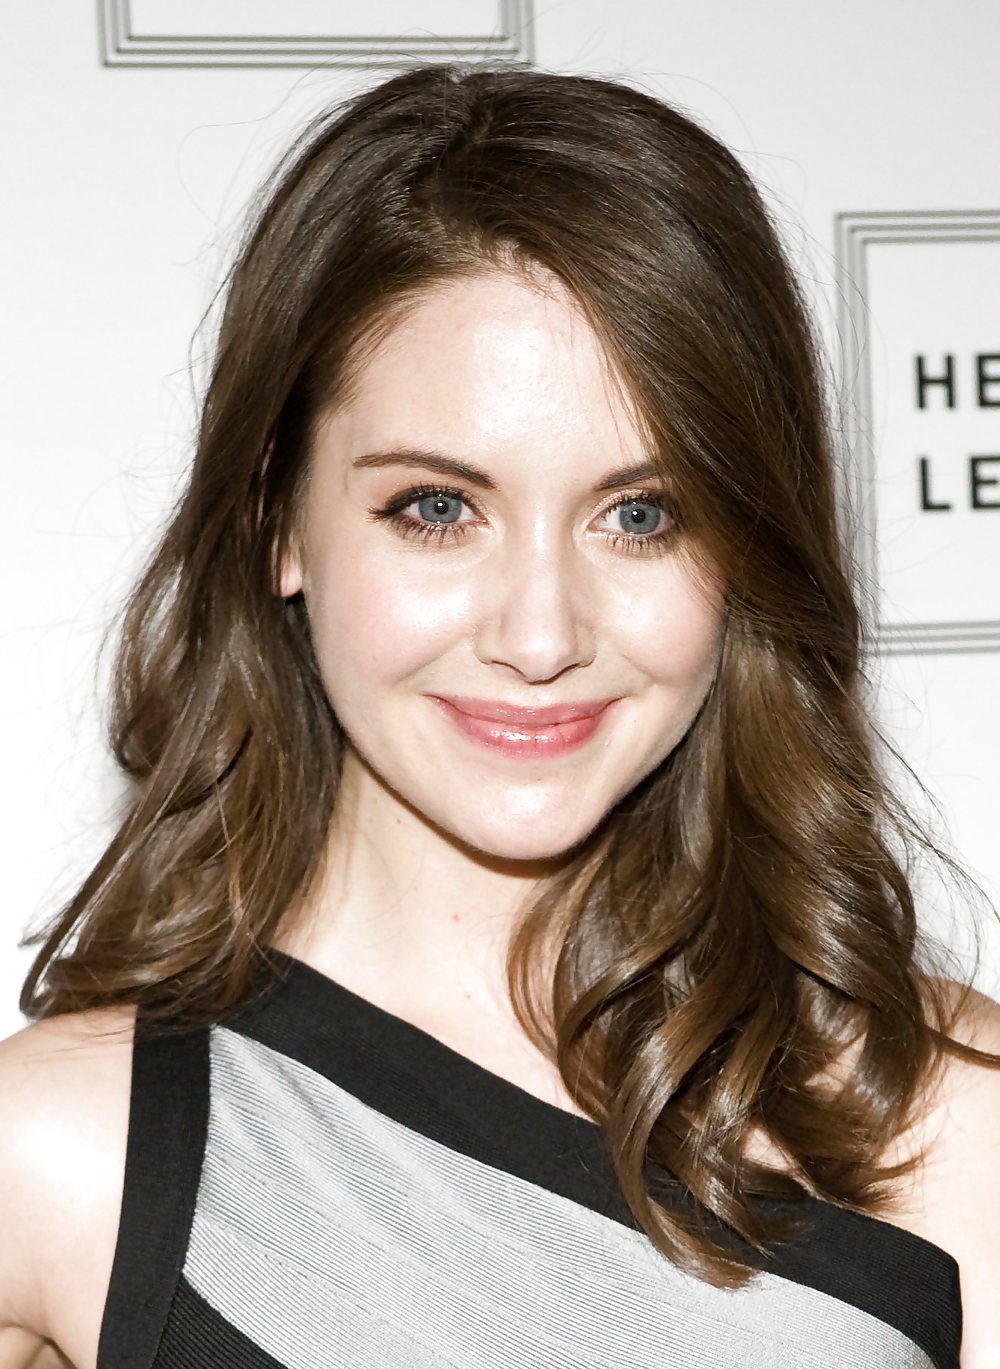 Community's Alison Brie and Gillian Jacobs mega collection #675240